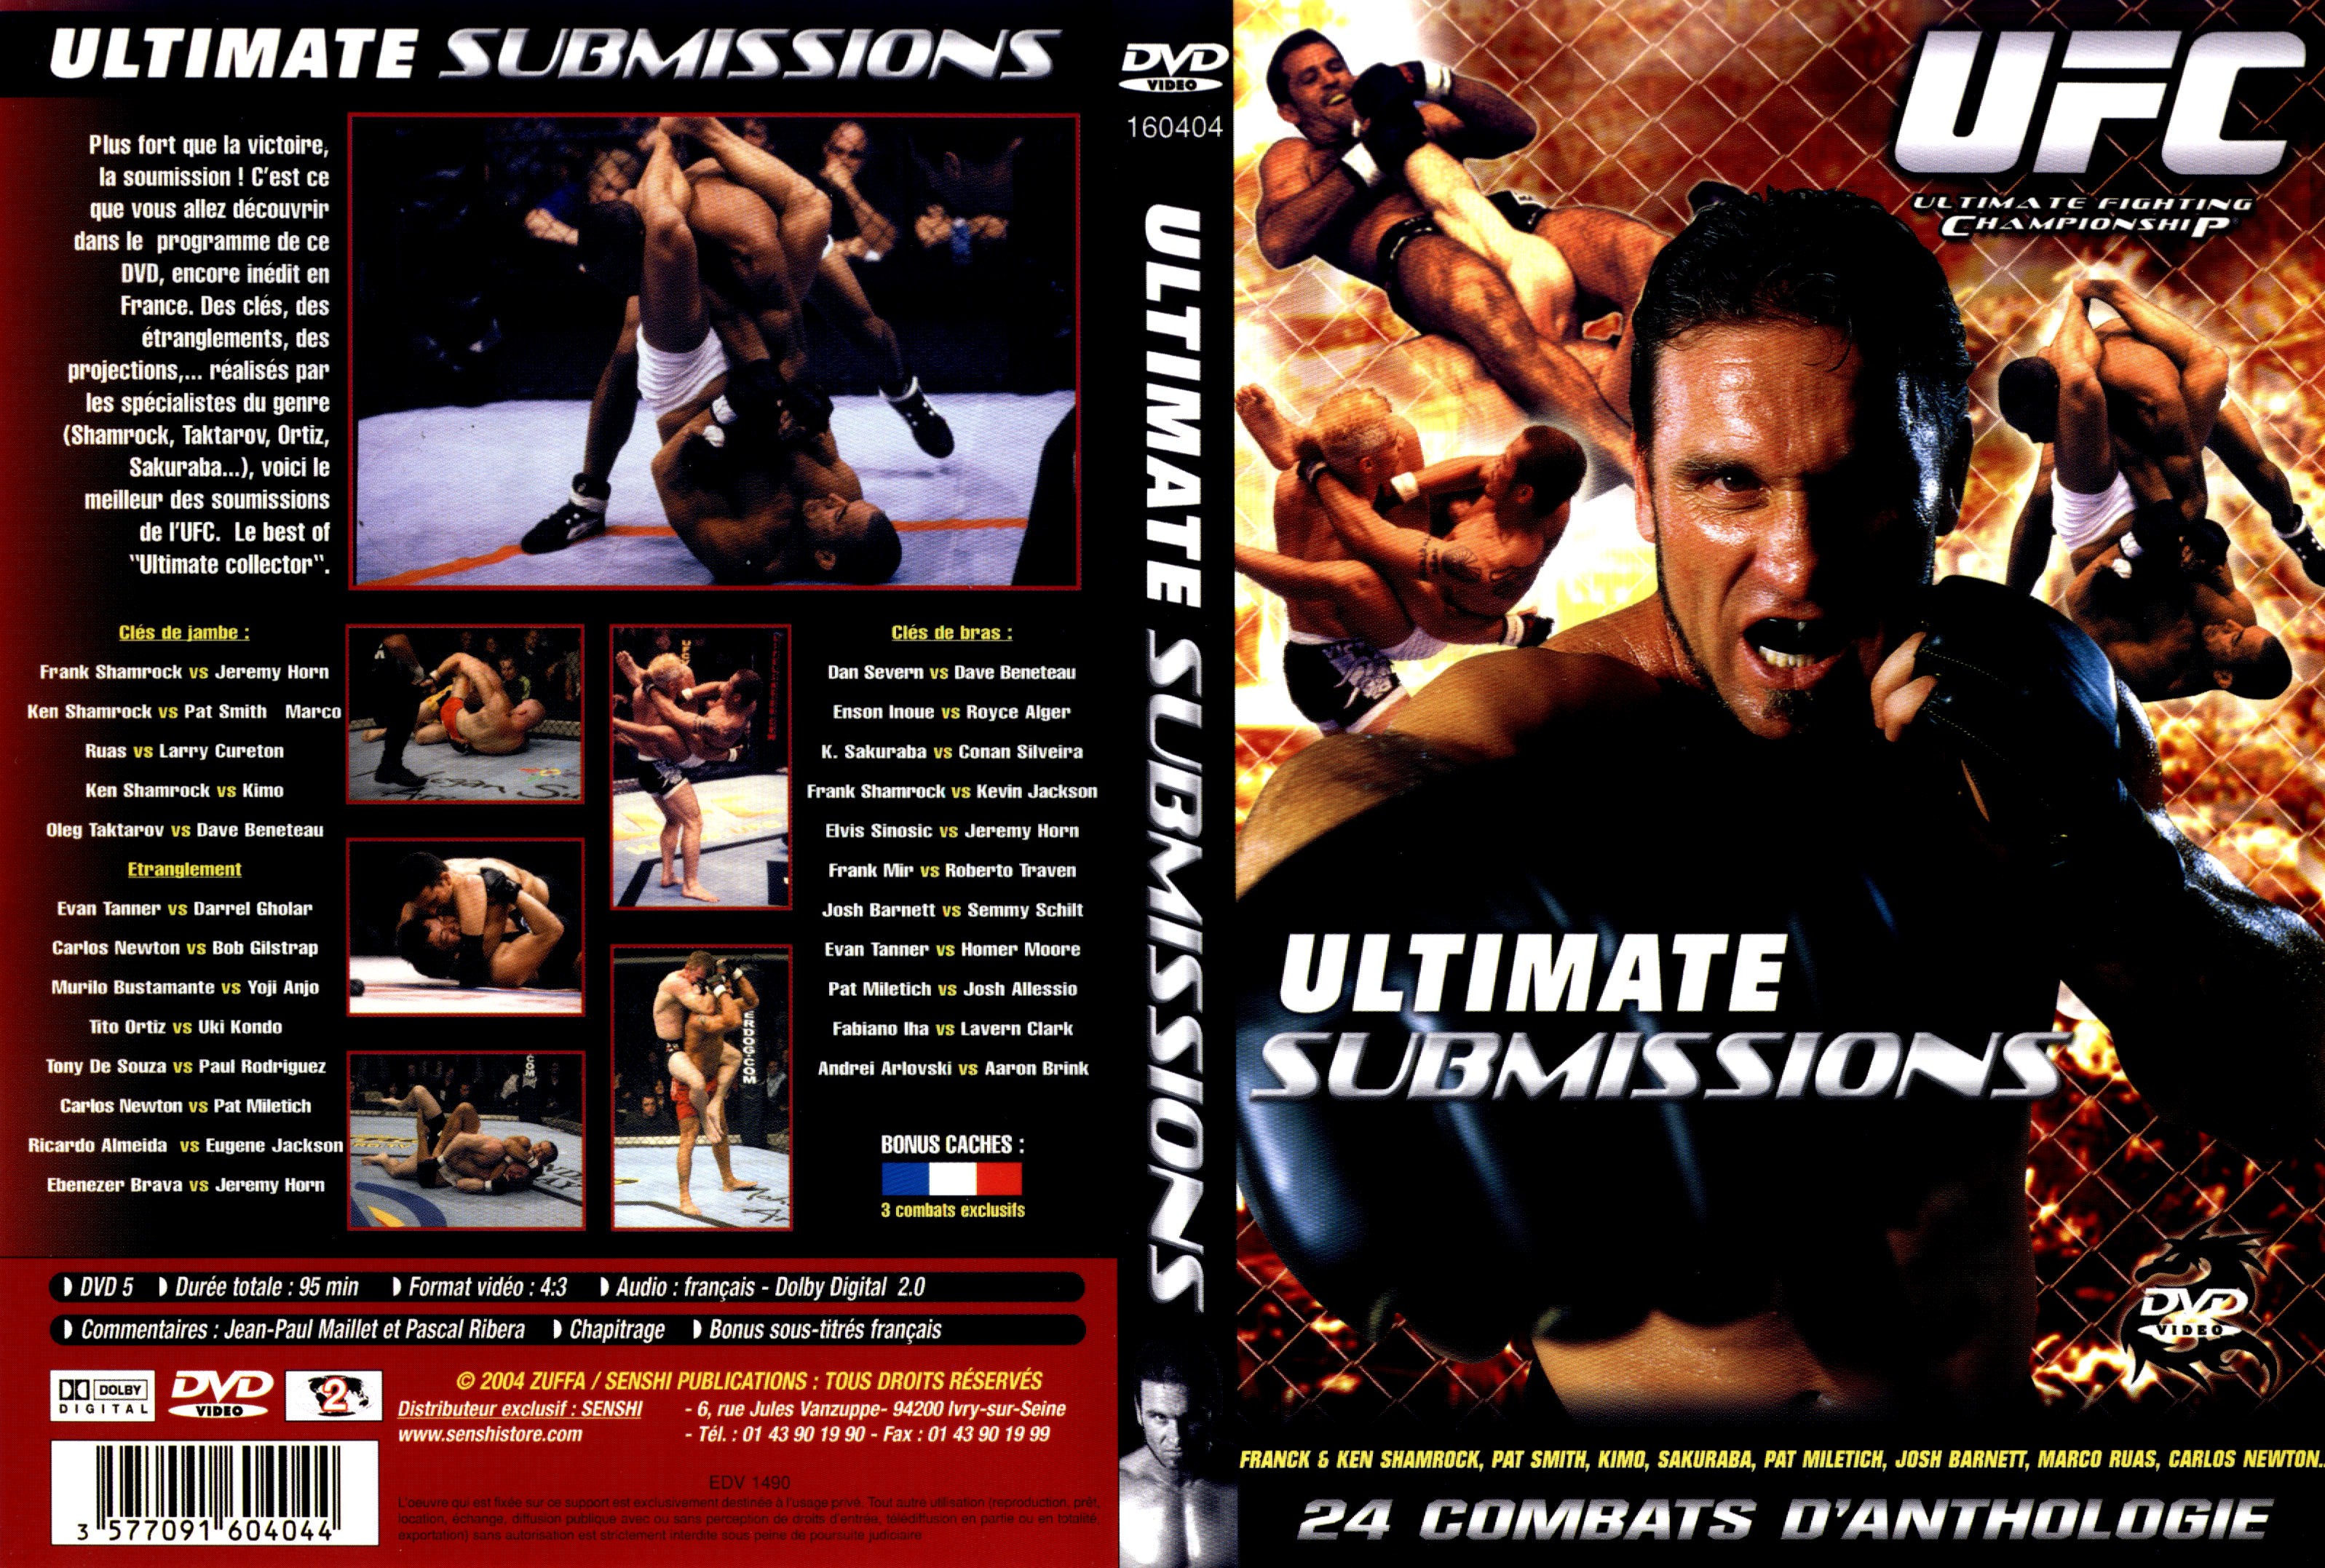 Jaquette DVD UFC Ultimate Submission